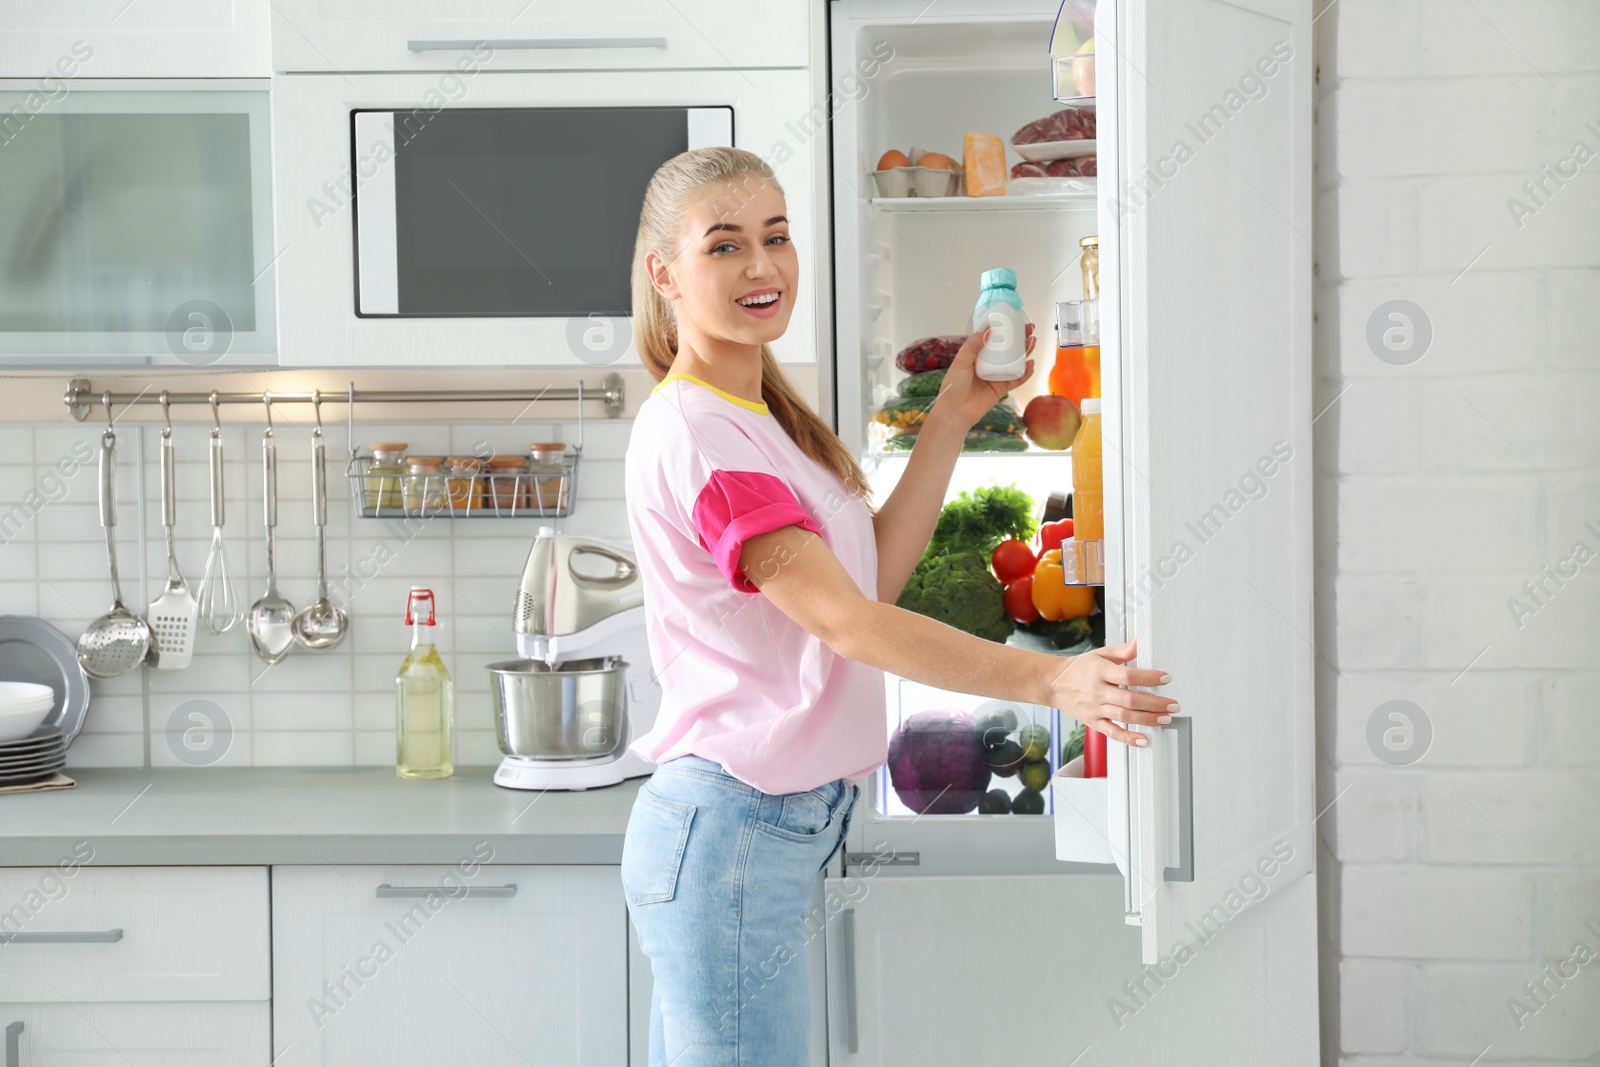 Photo of Woman taking products out of refrigerator in kitchen